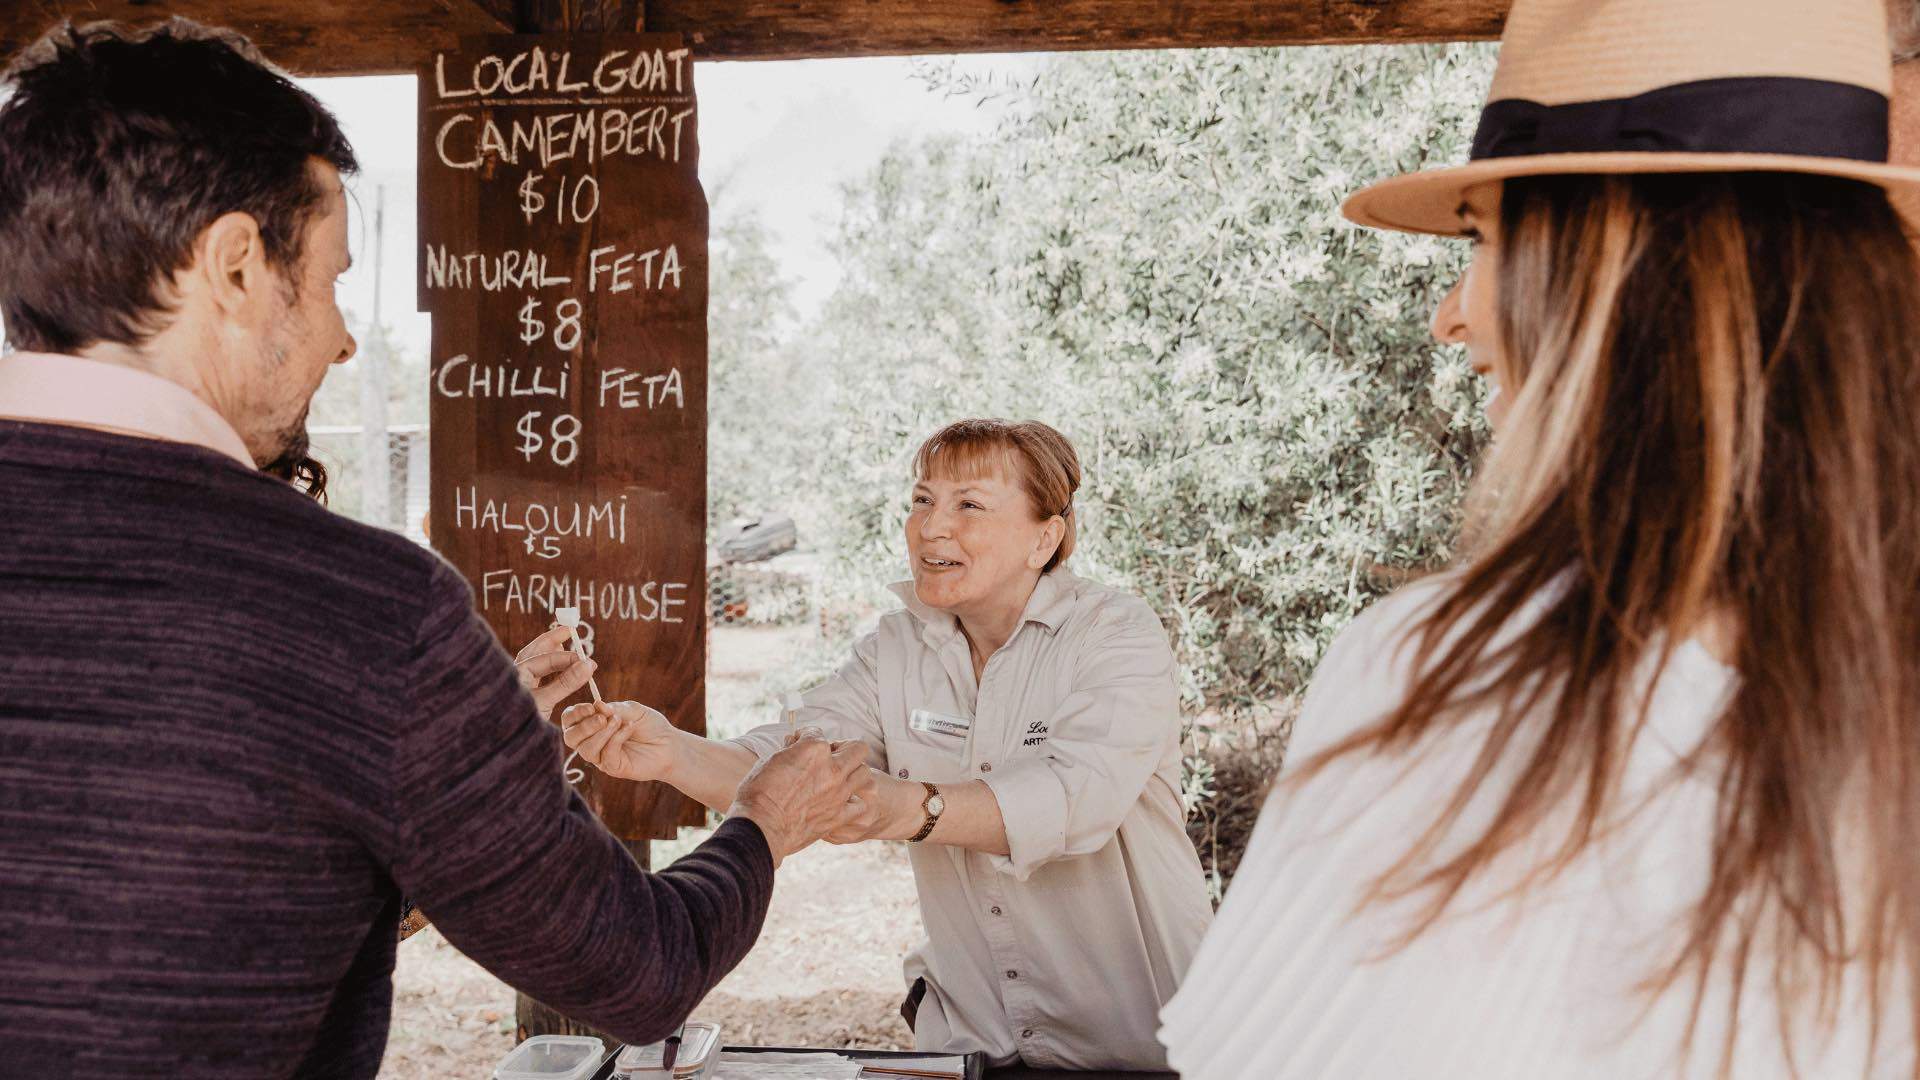 A woman greeting a couple at her cheese stand.